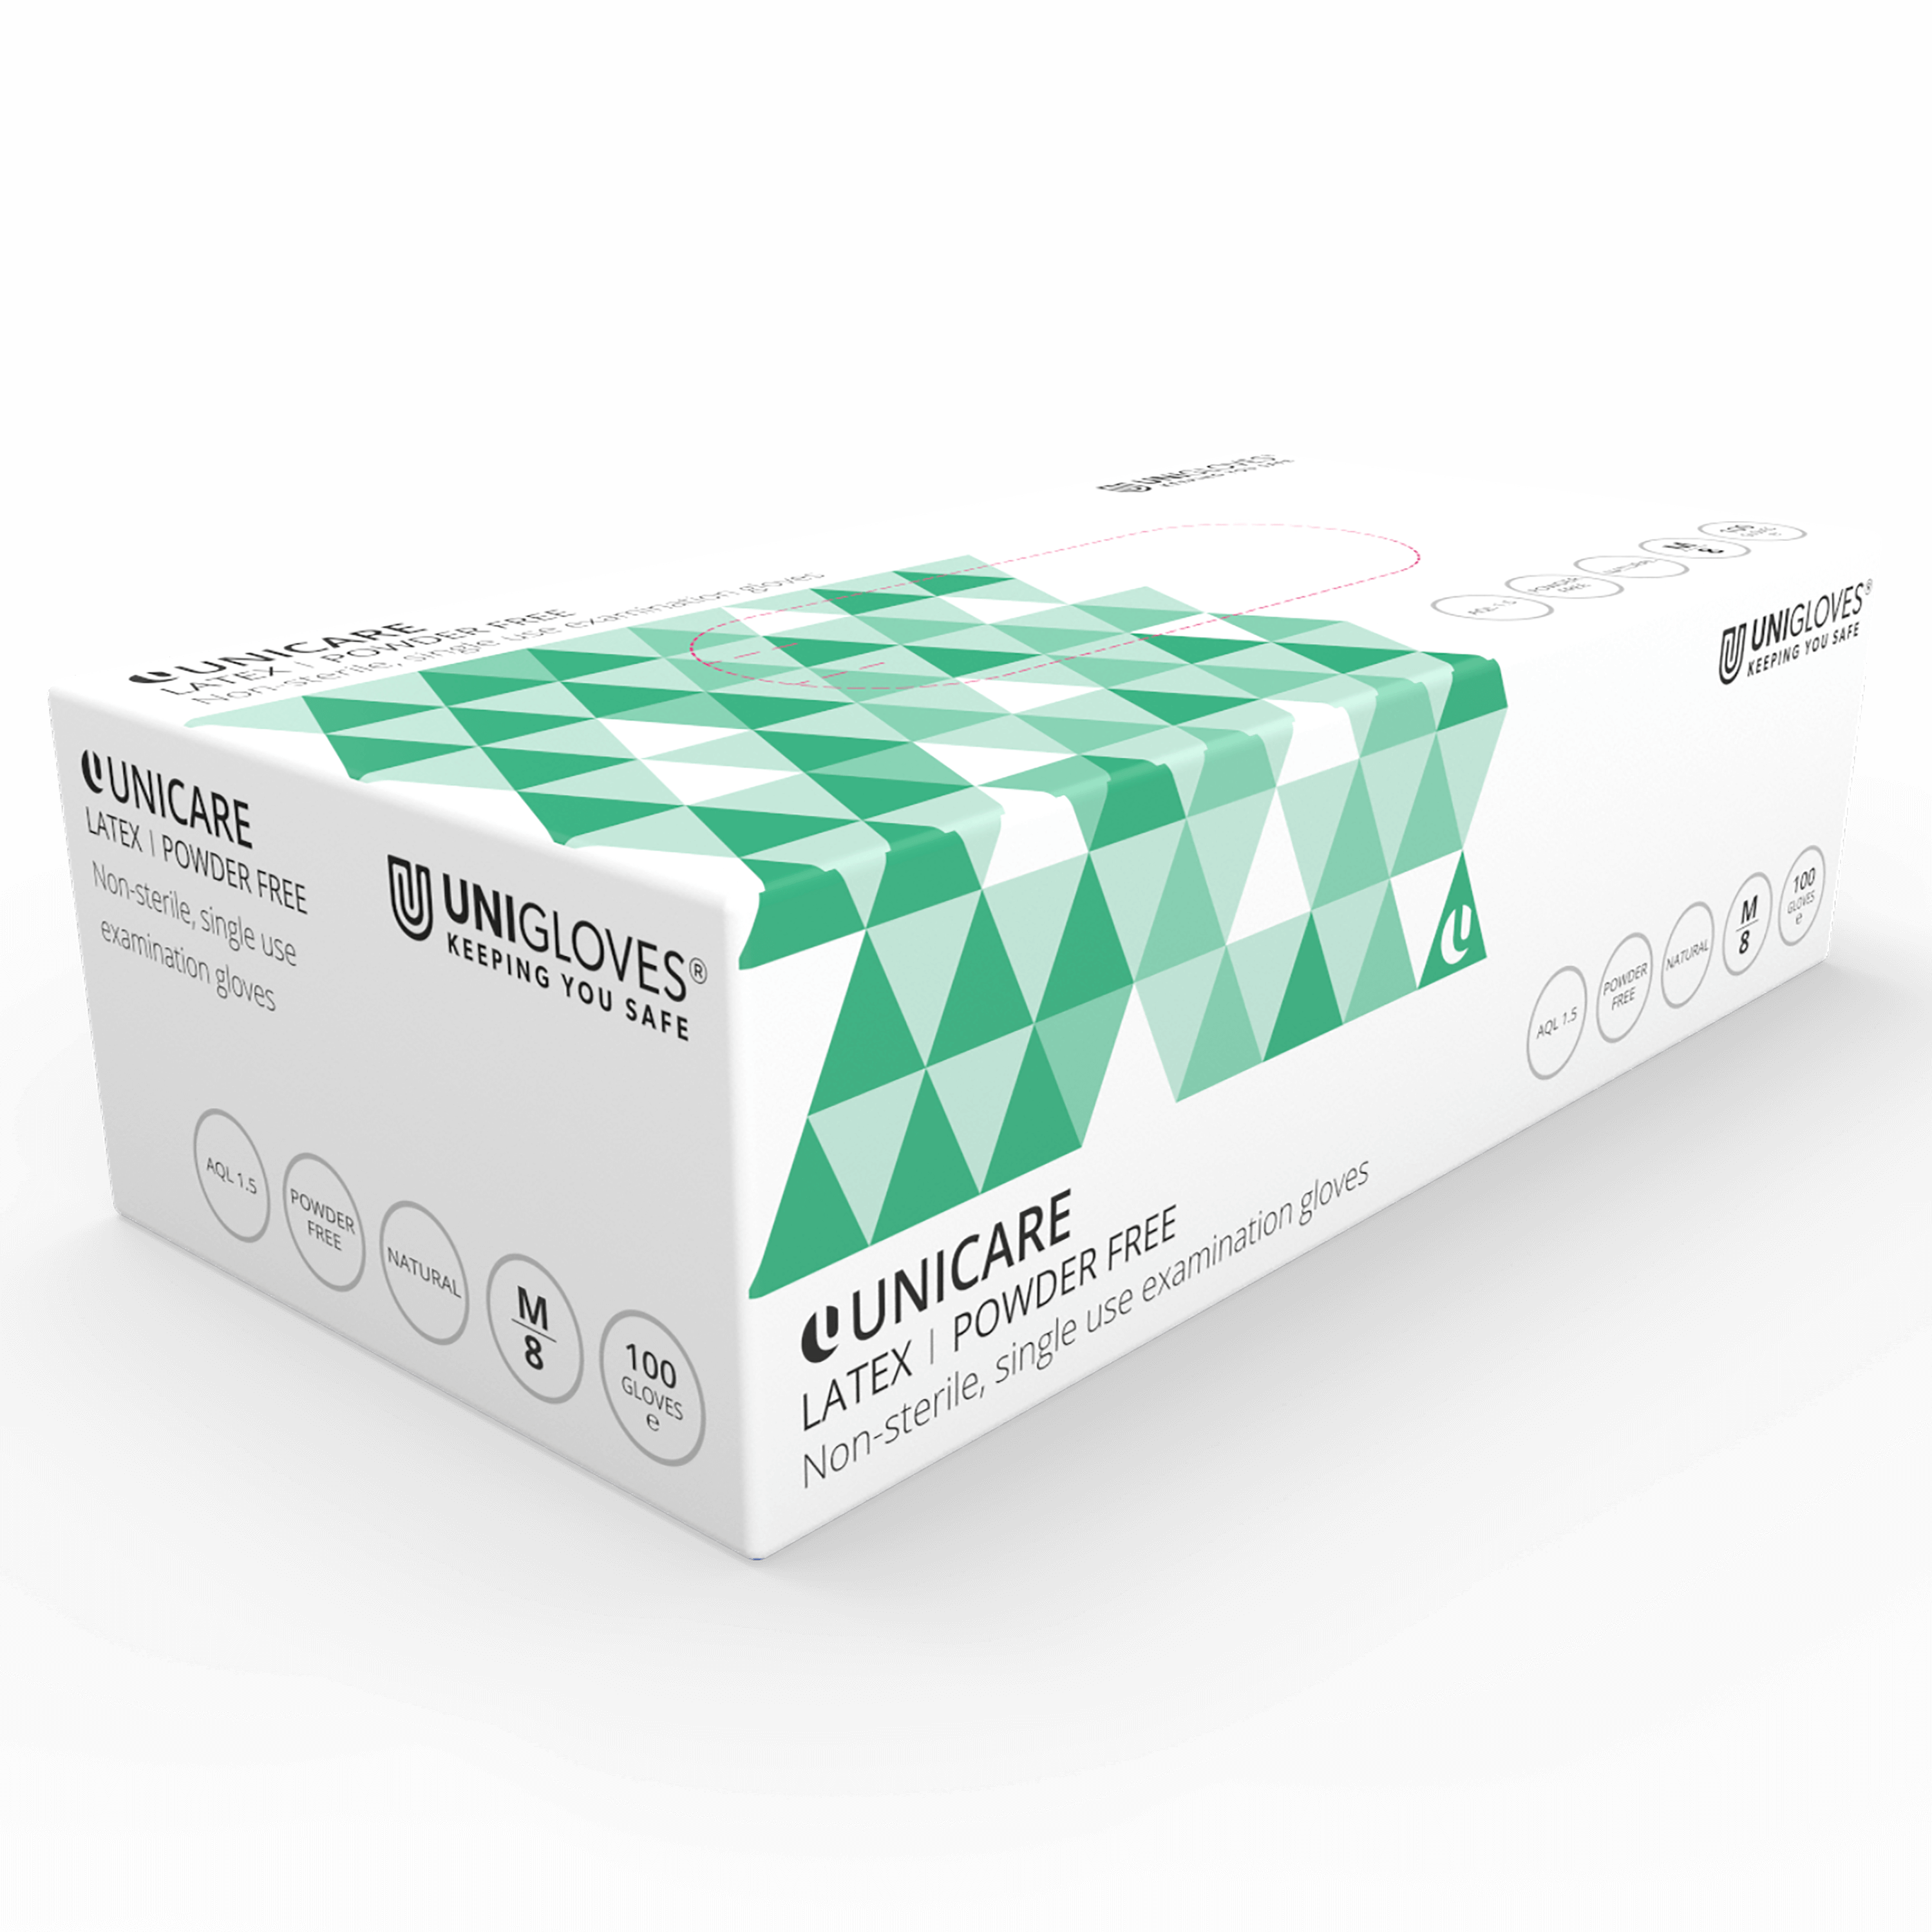 Unicare Latex Small - Extra Strong Non-Powdered Latex Examination Gloves - Cases of 10 Boxes, 100 Gloves per Box